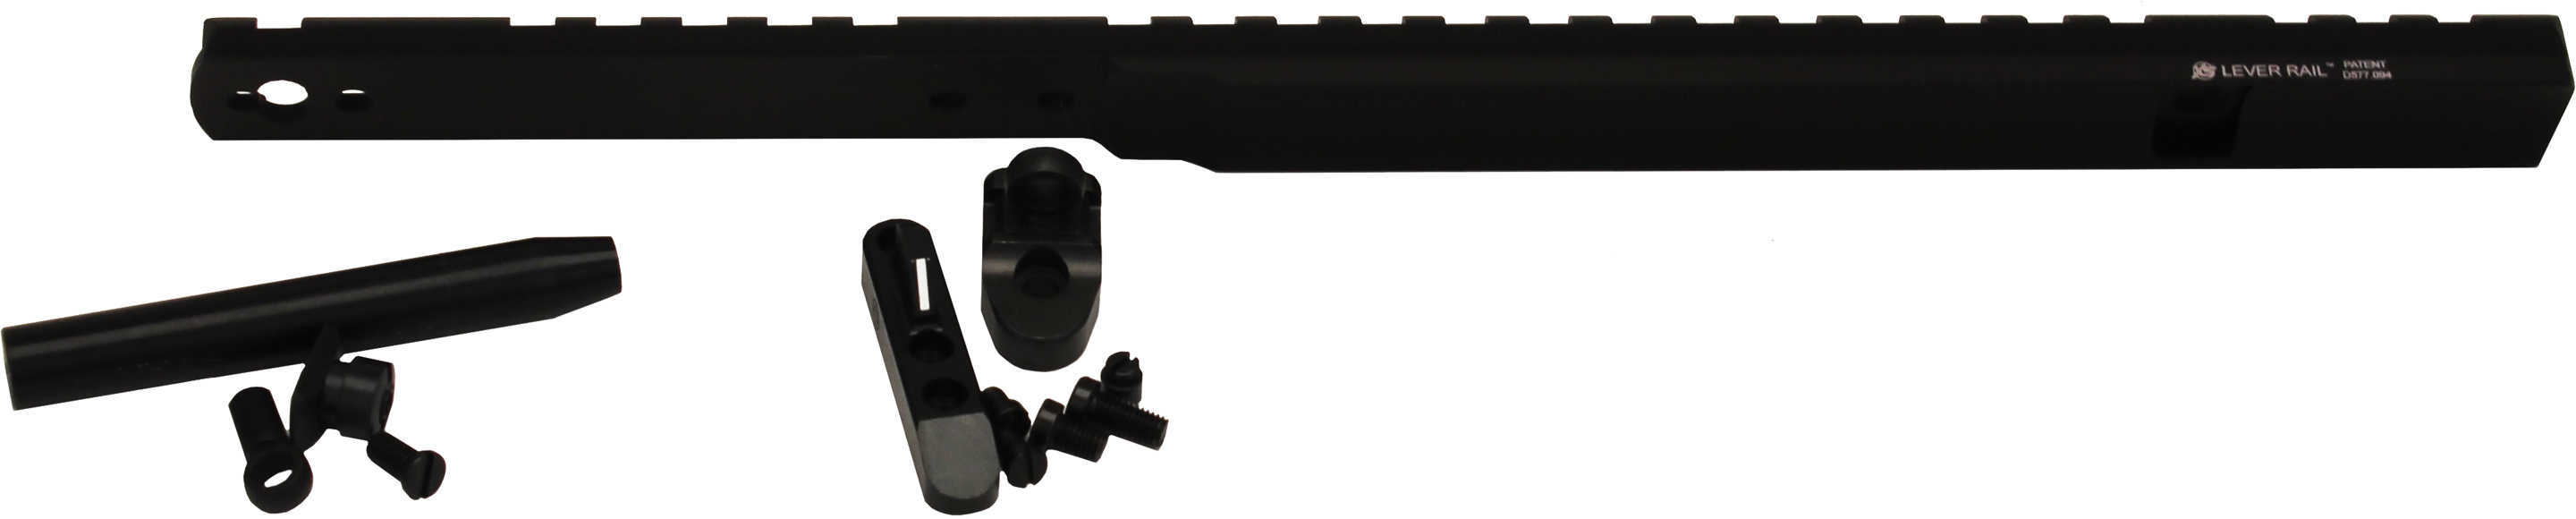 XS Lever Rail Ghost Ring Sight Set For Marlin 1895 Round Bbl.